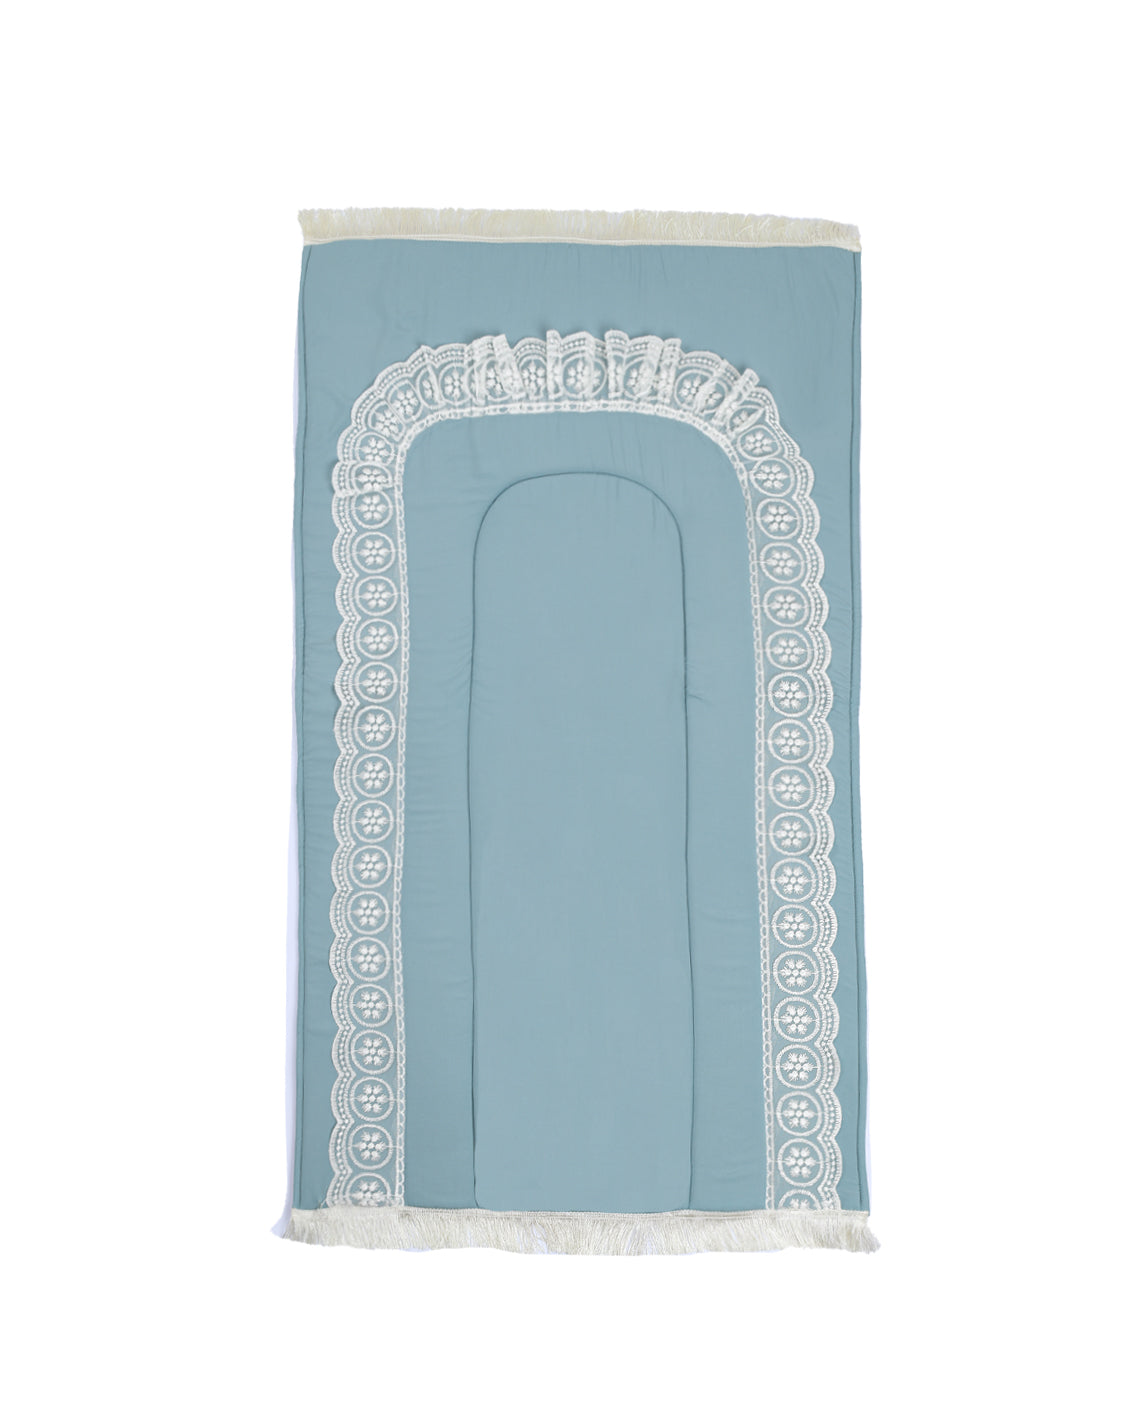 Mint Lace Embroidered Prayer Mat